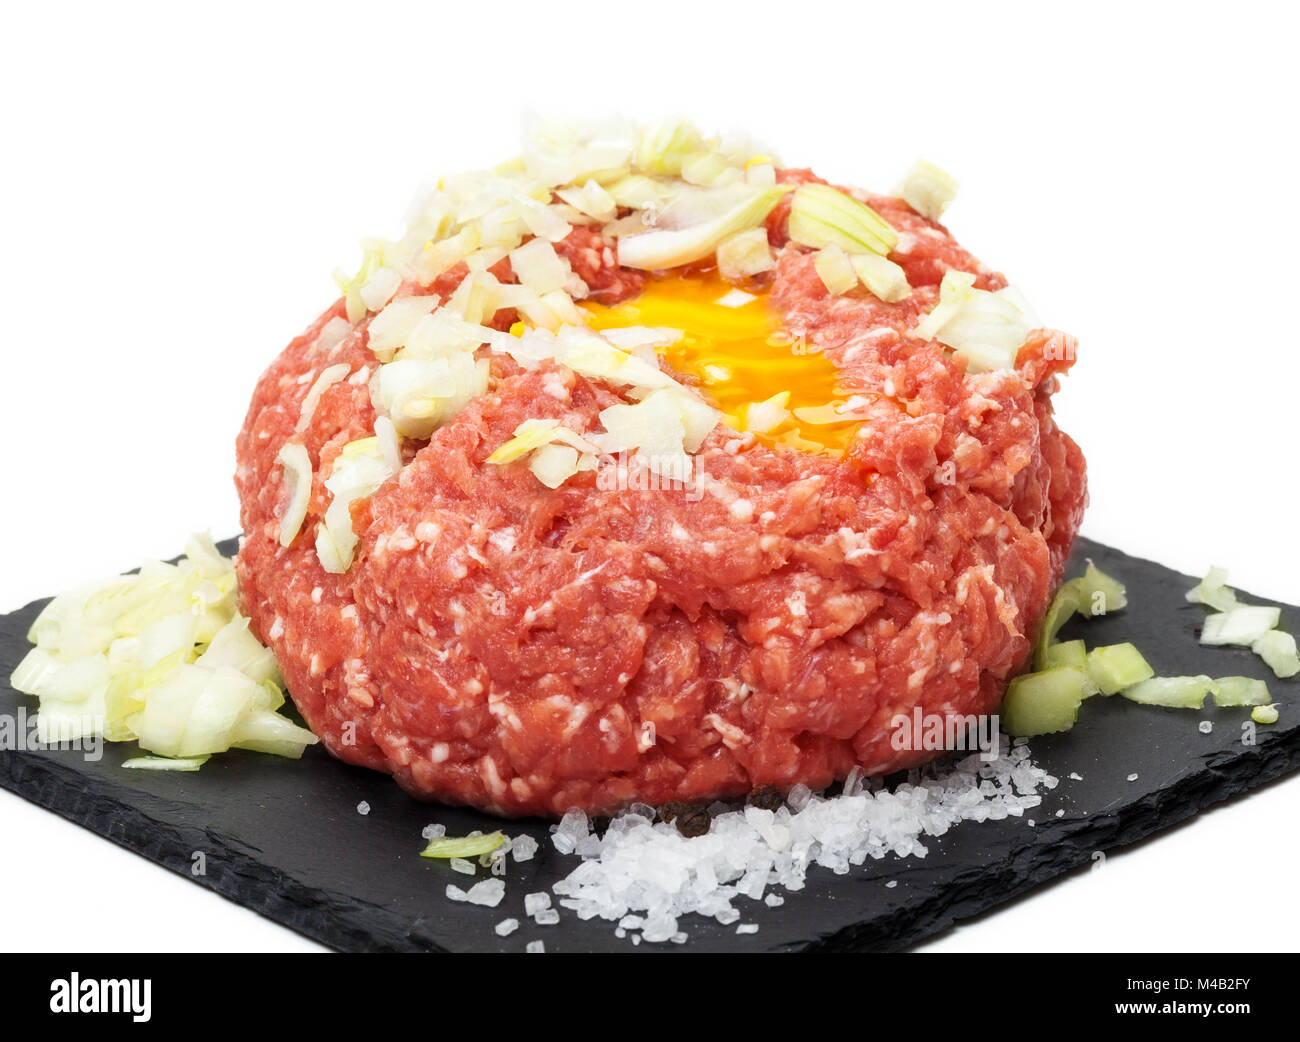 Mett','Hackepeter',minced or ground meat Stock Photo